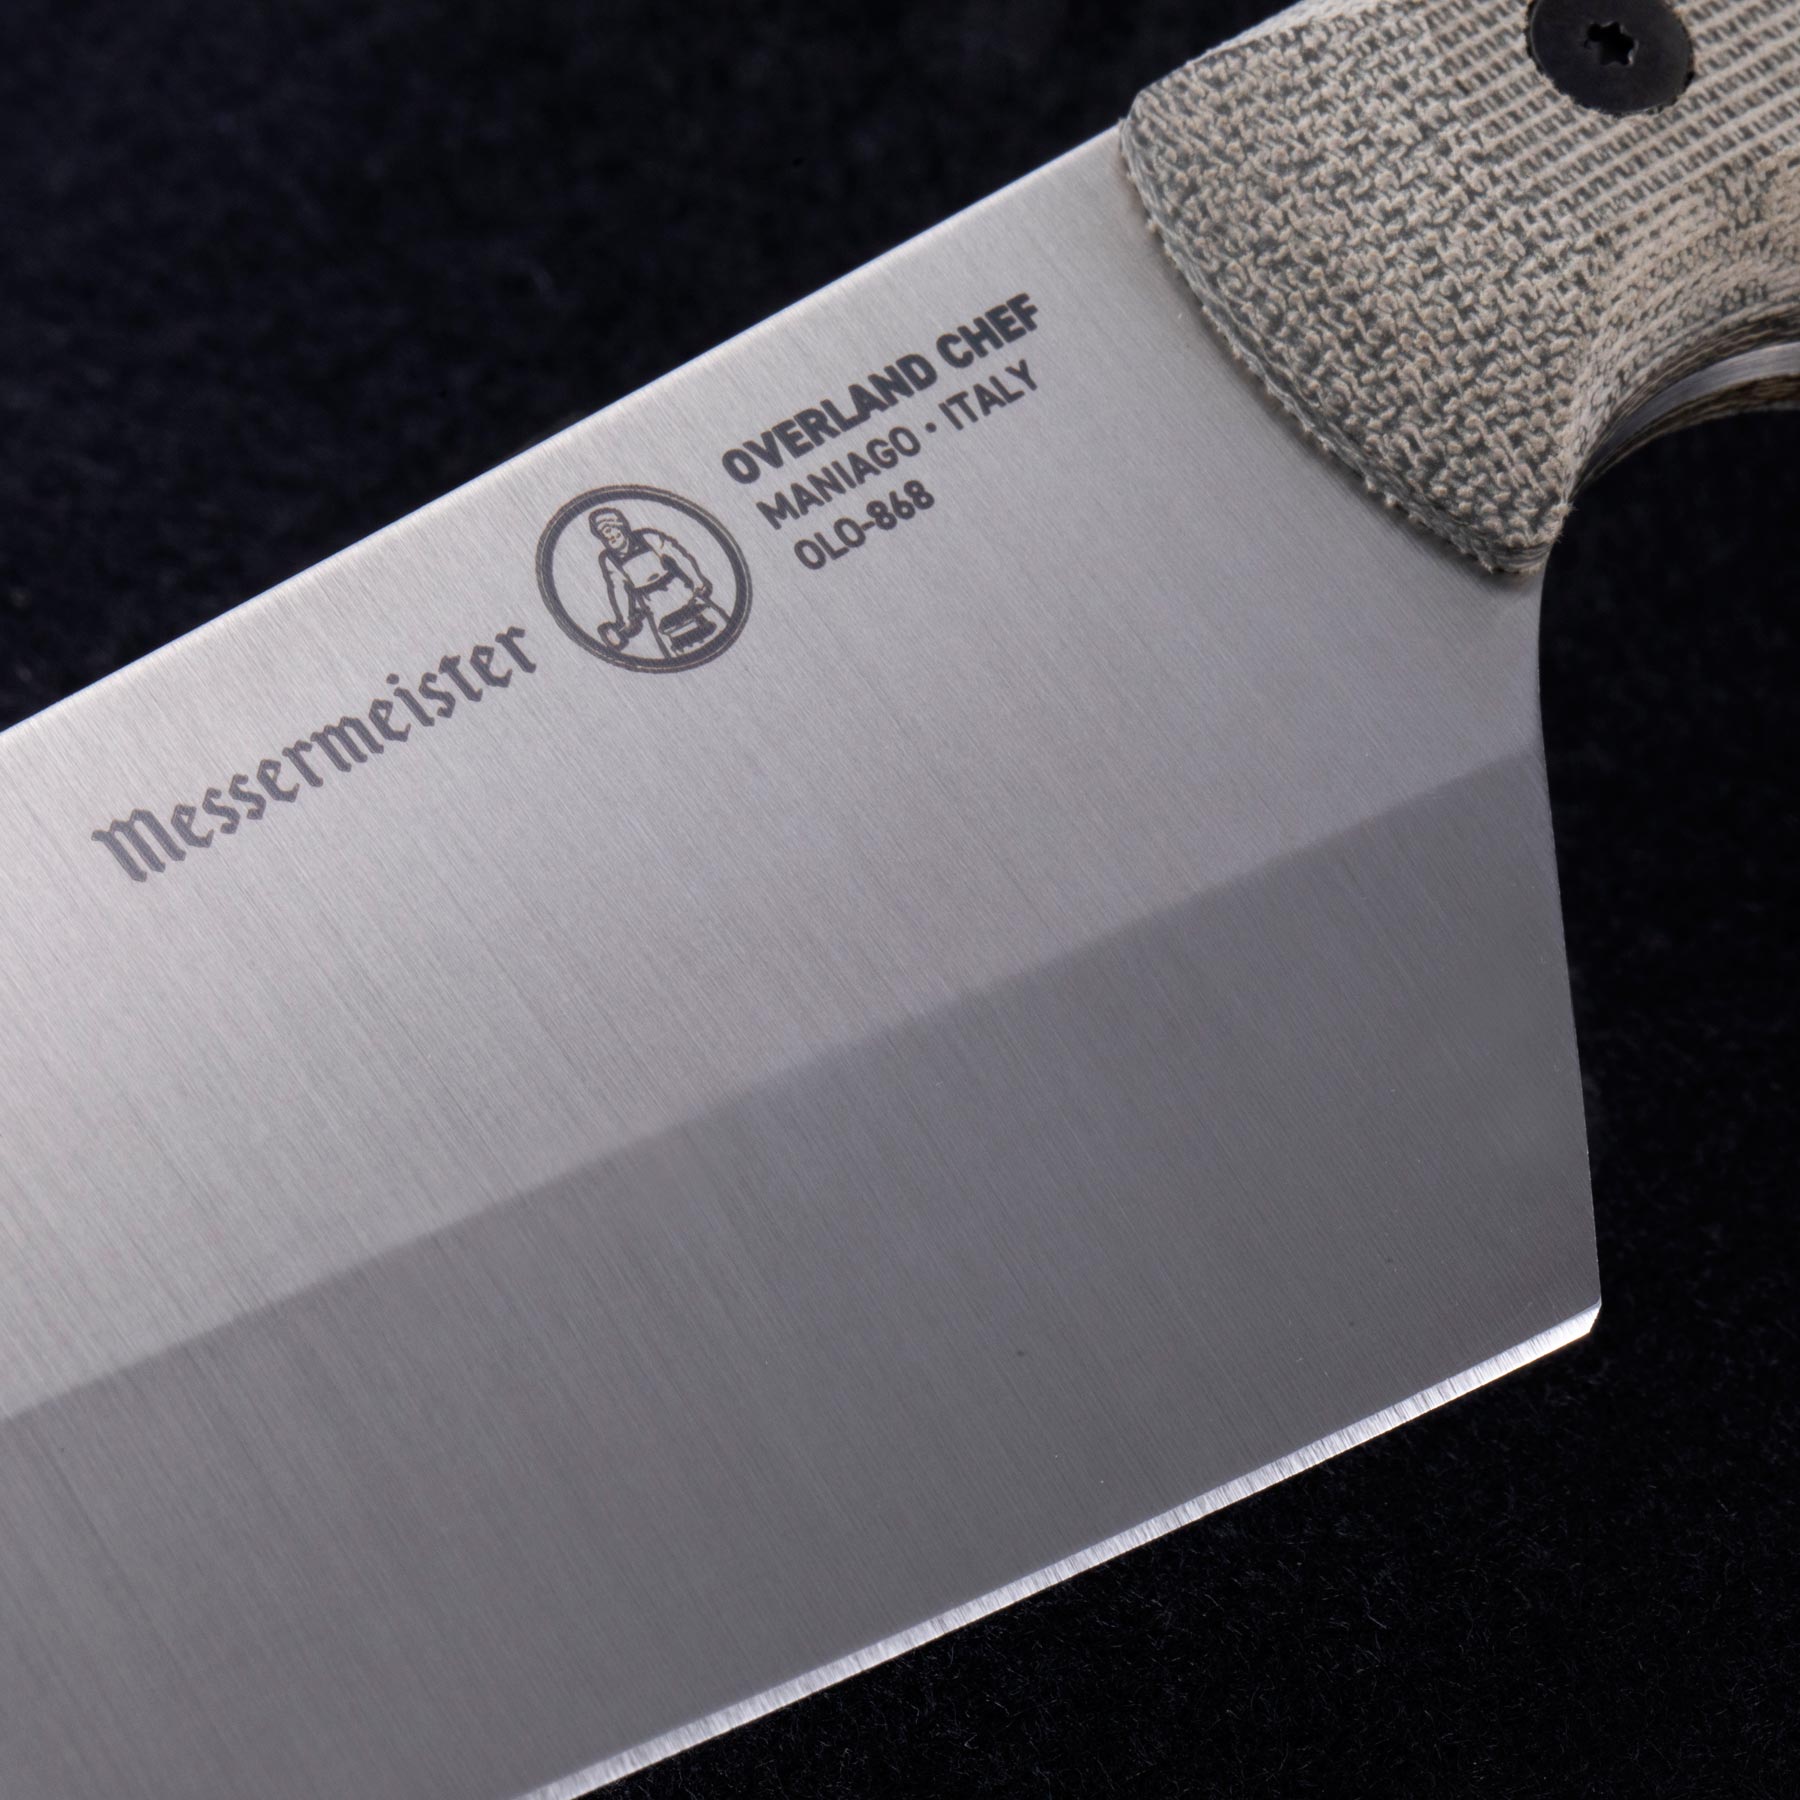 Overland Chef 8 Inch Chef's Knife